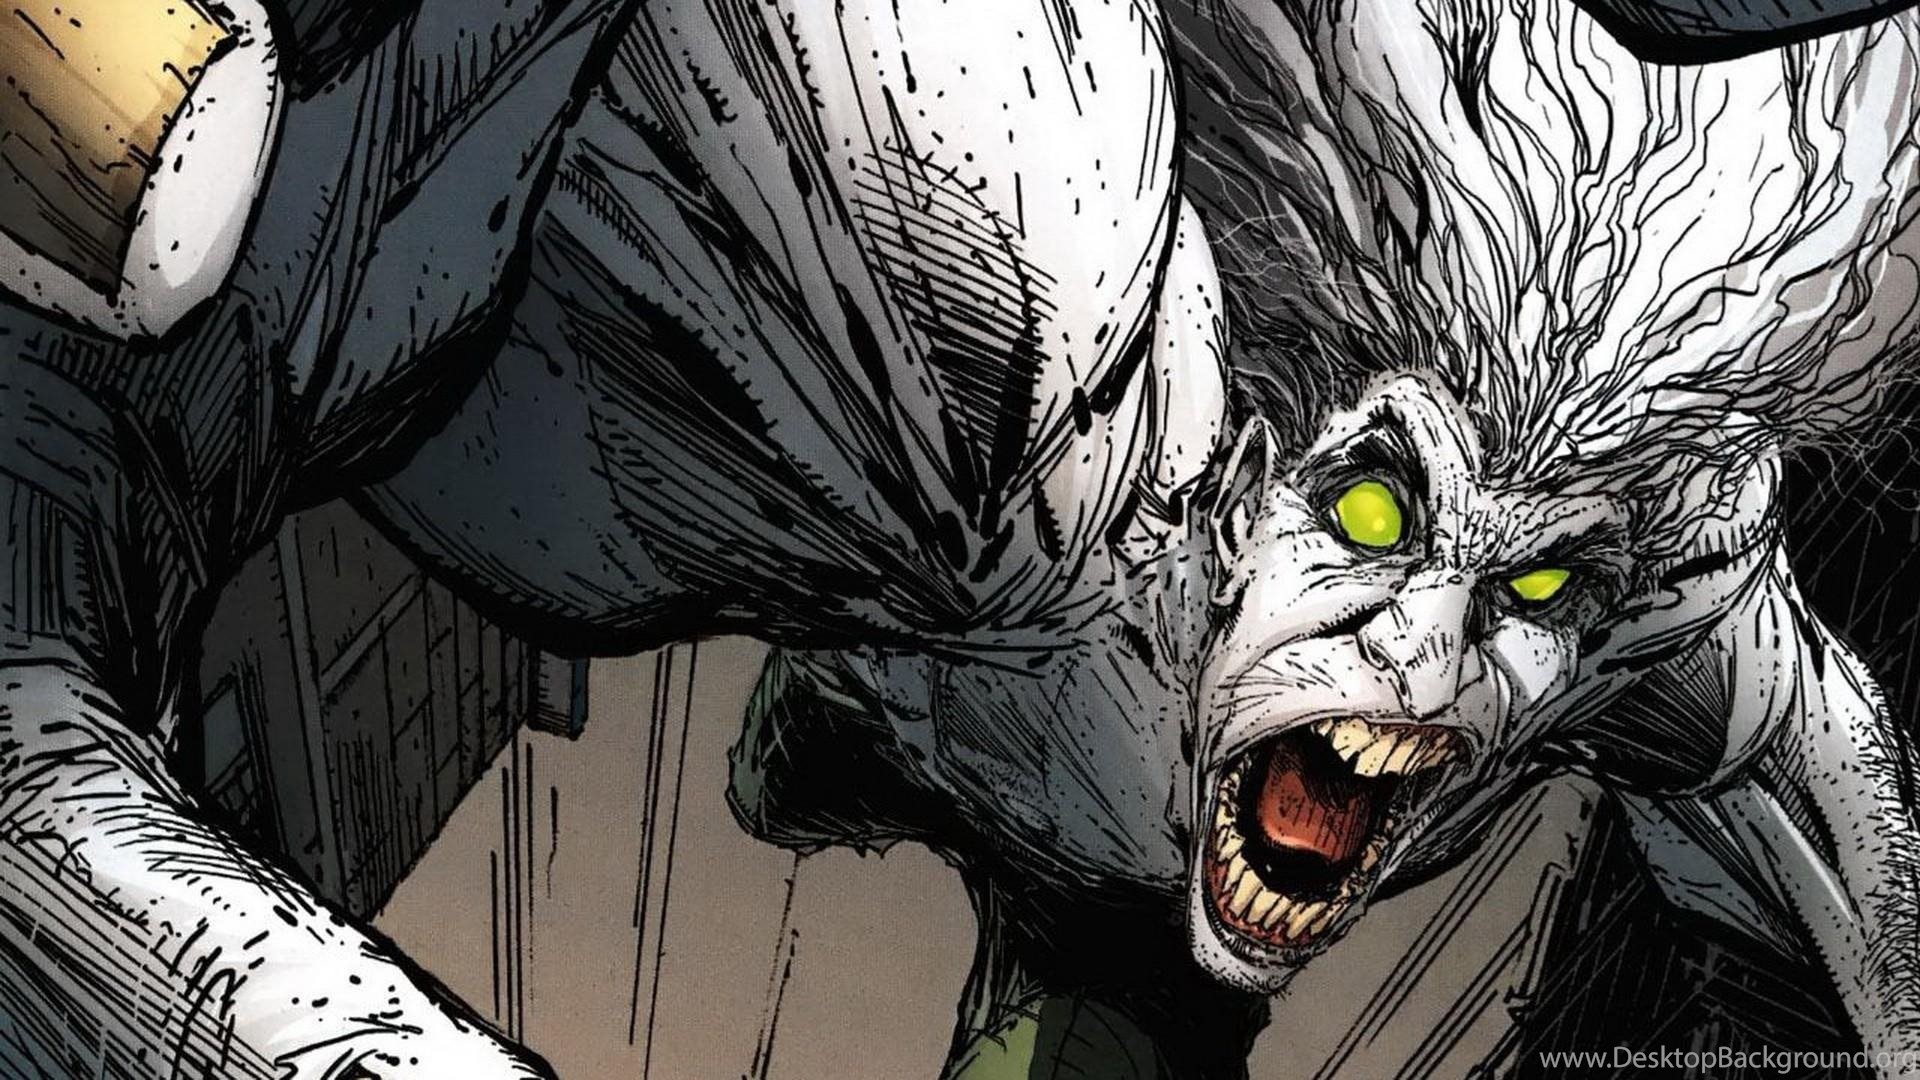 1920x1080 Spawn Comics Image The Freak Wallpapers